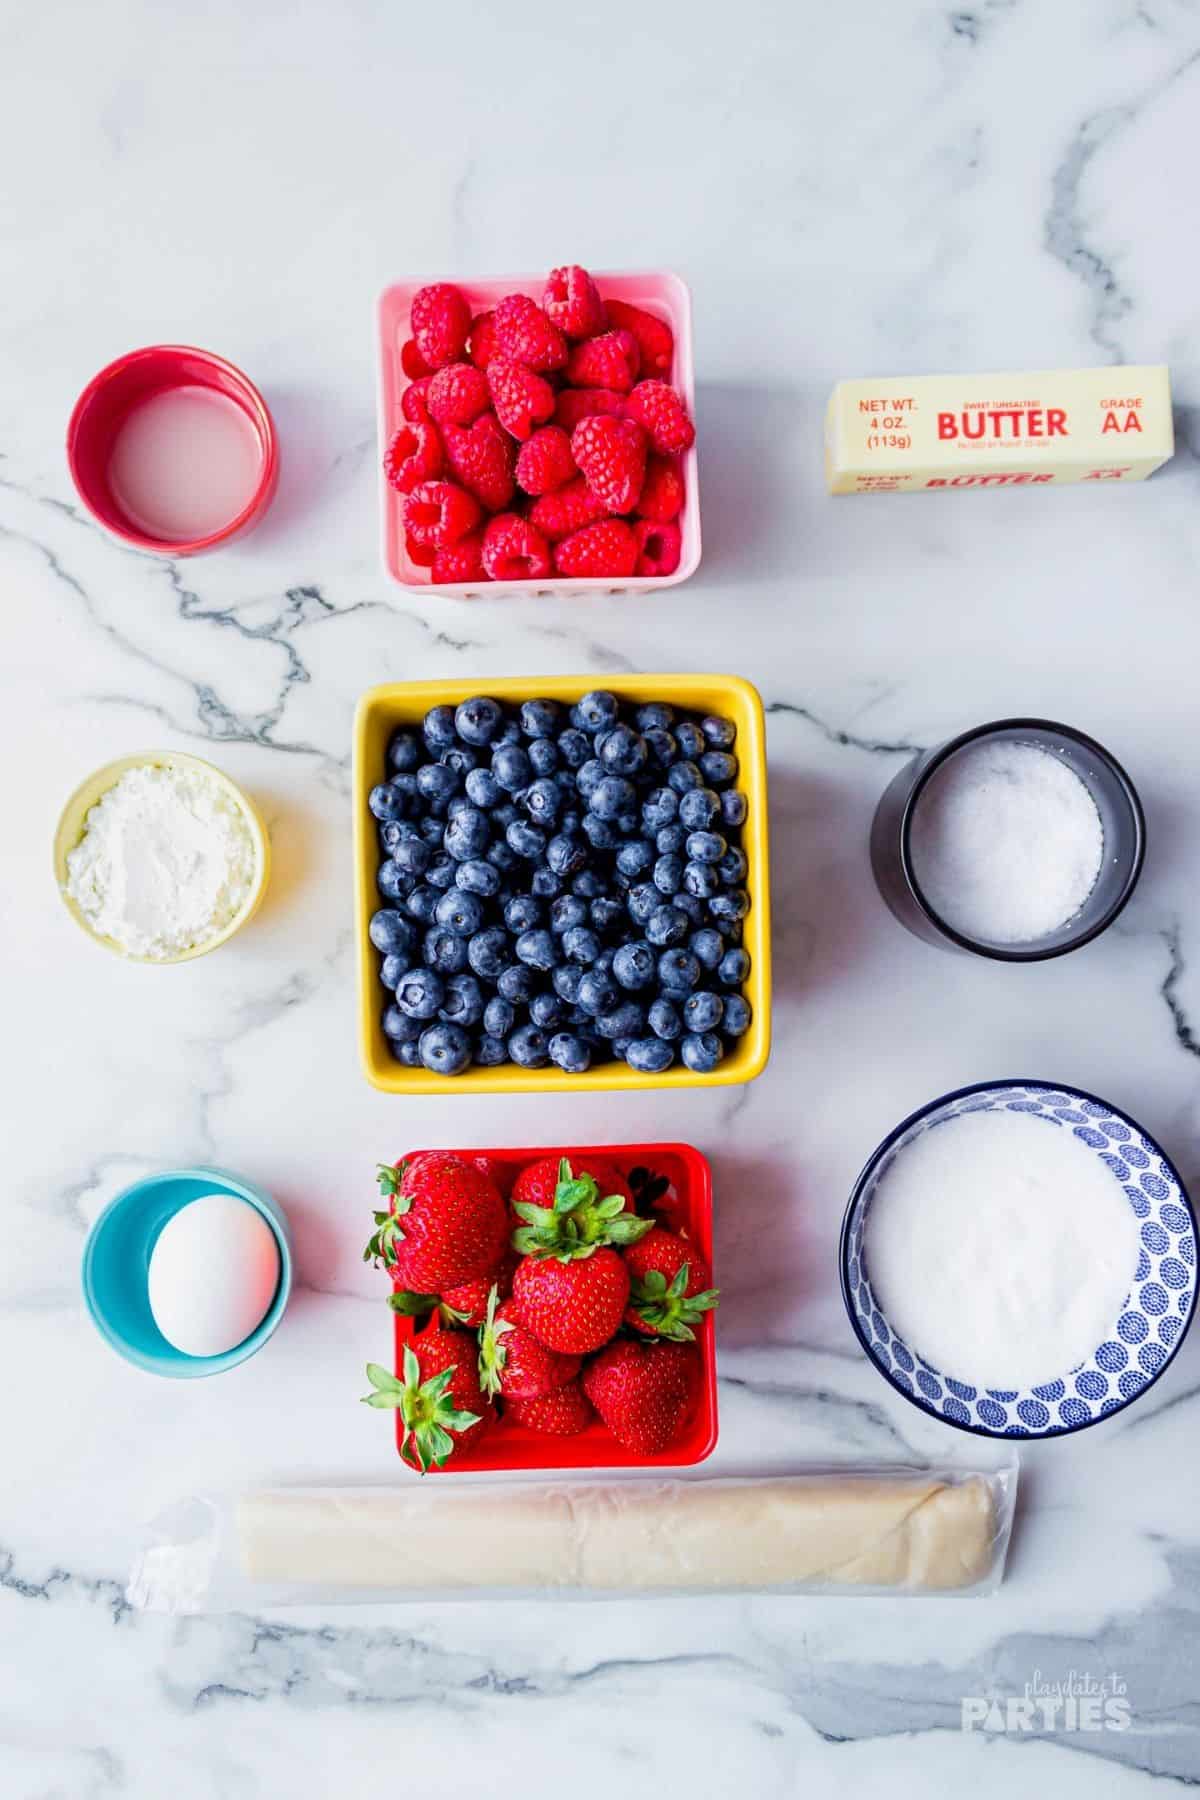 Ingredients for a mixed berry pie.